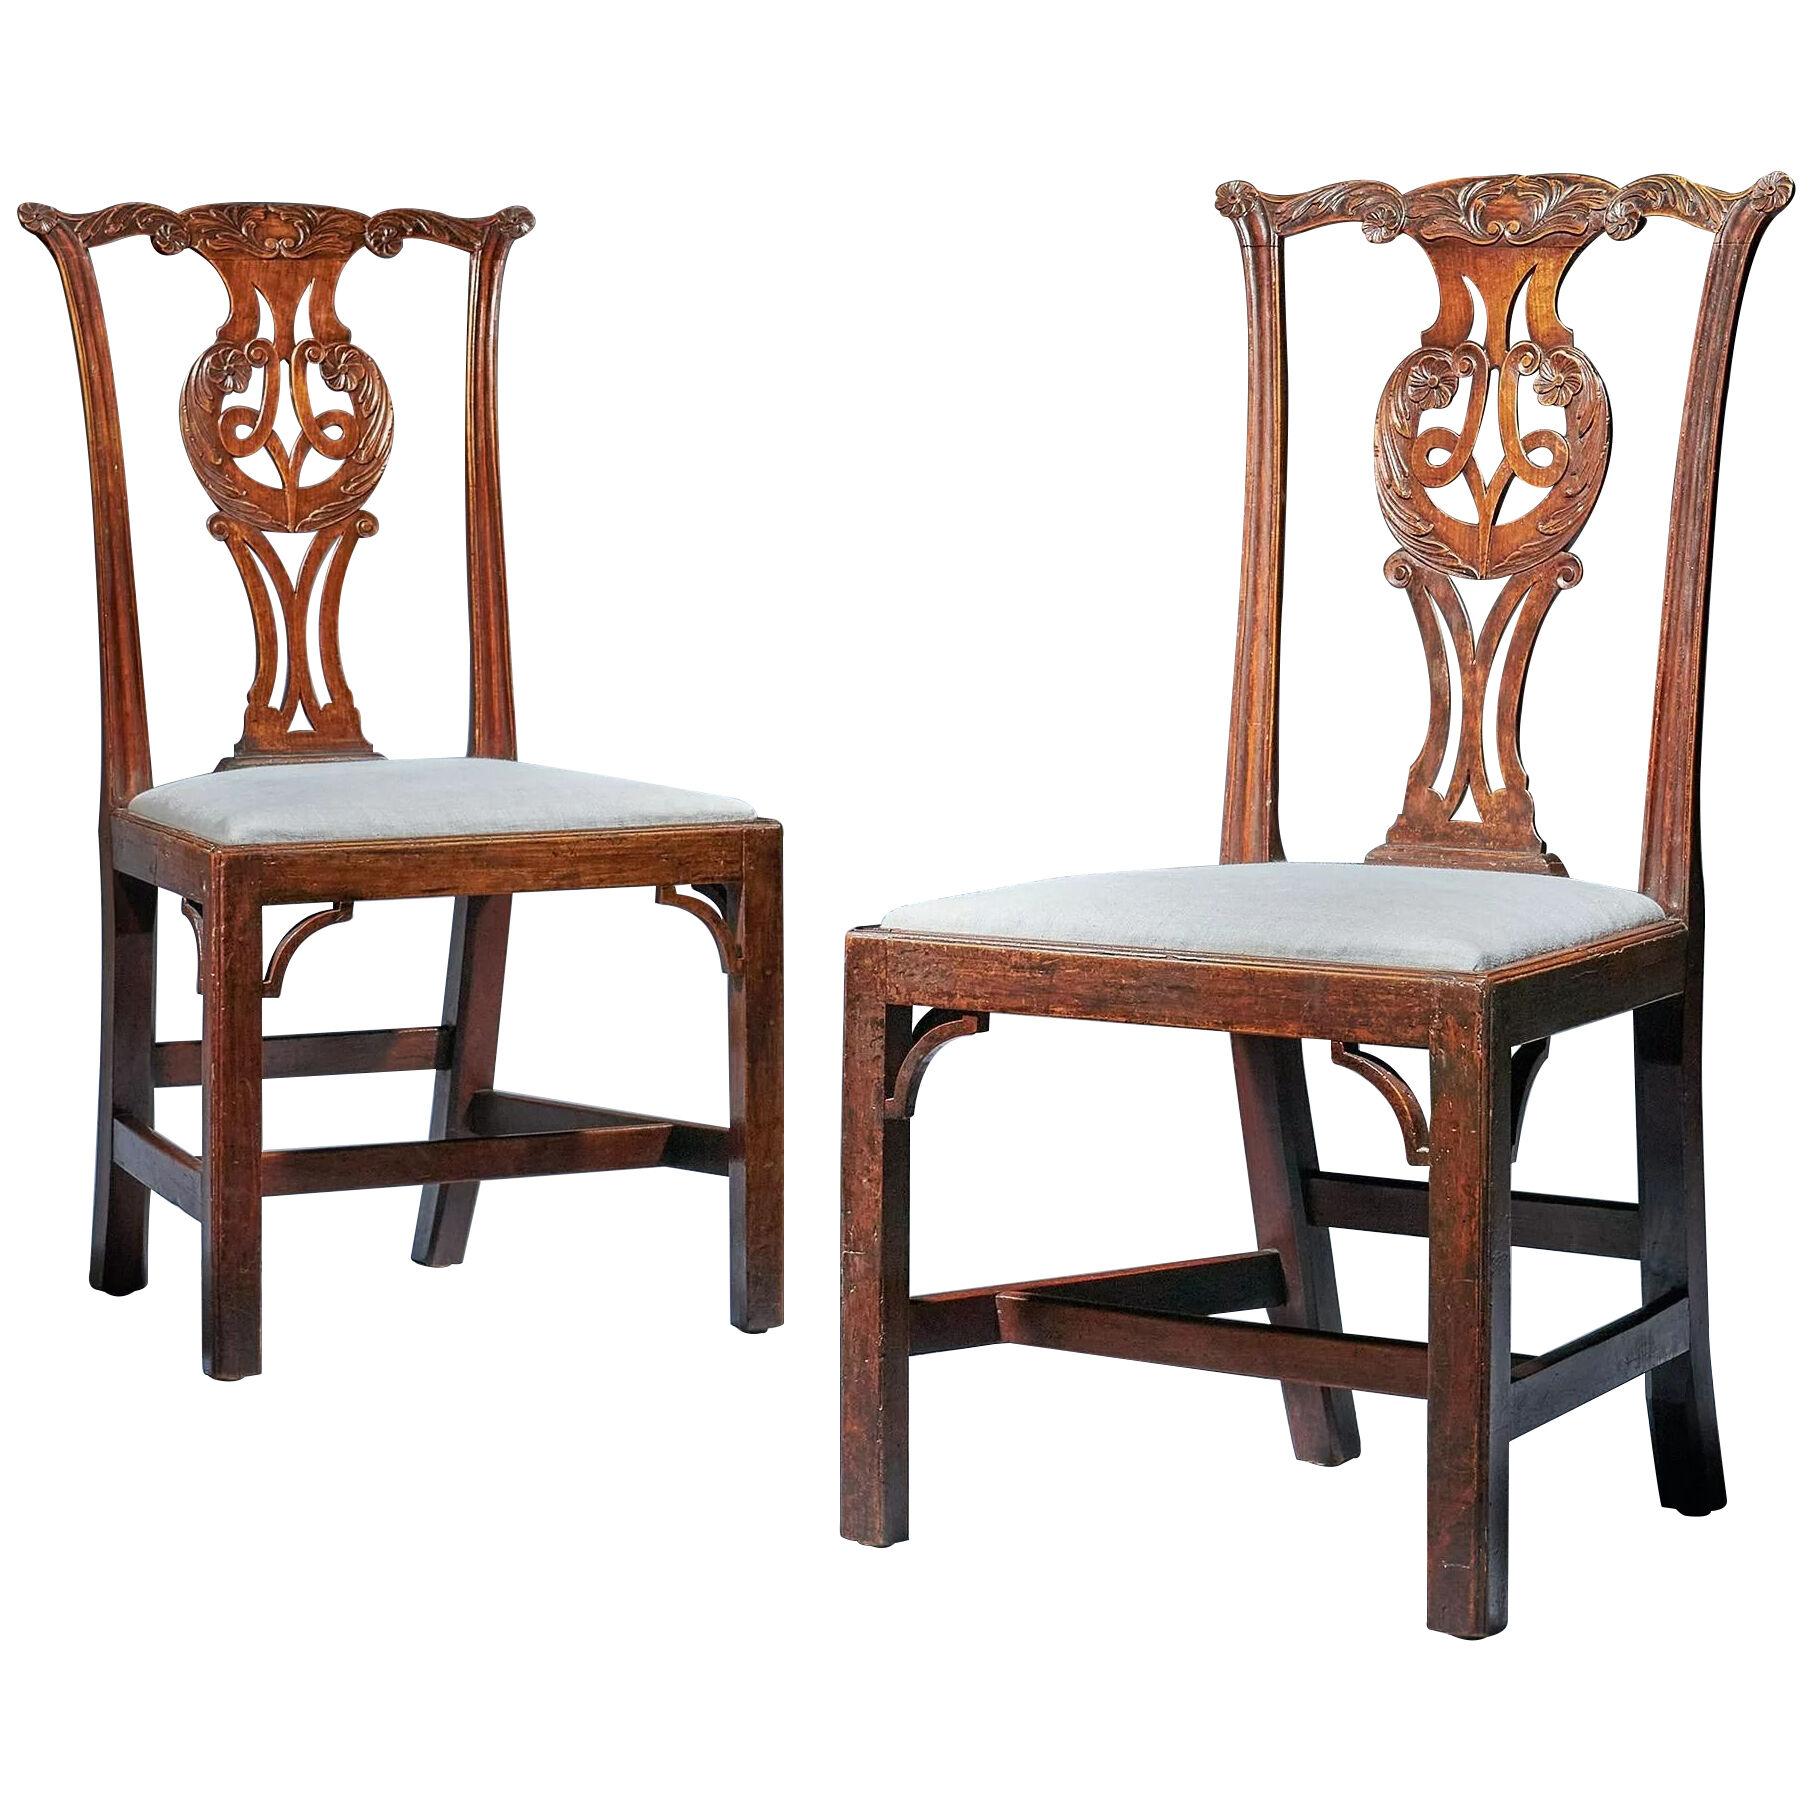 Unusual Pair of 18th Century George III Cherry Chairs - Chippendale Period